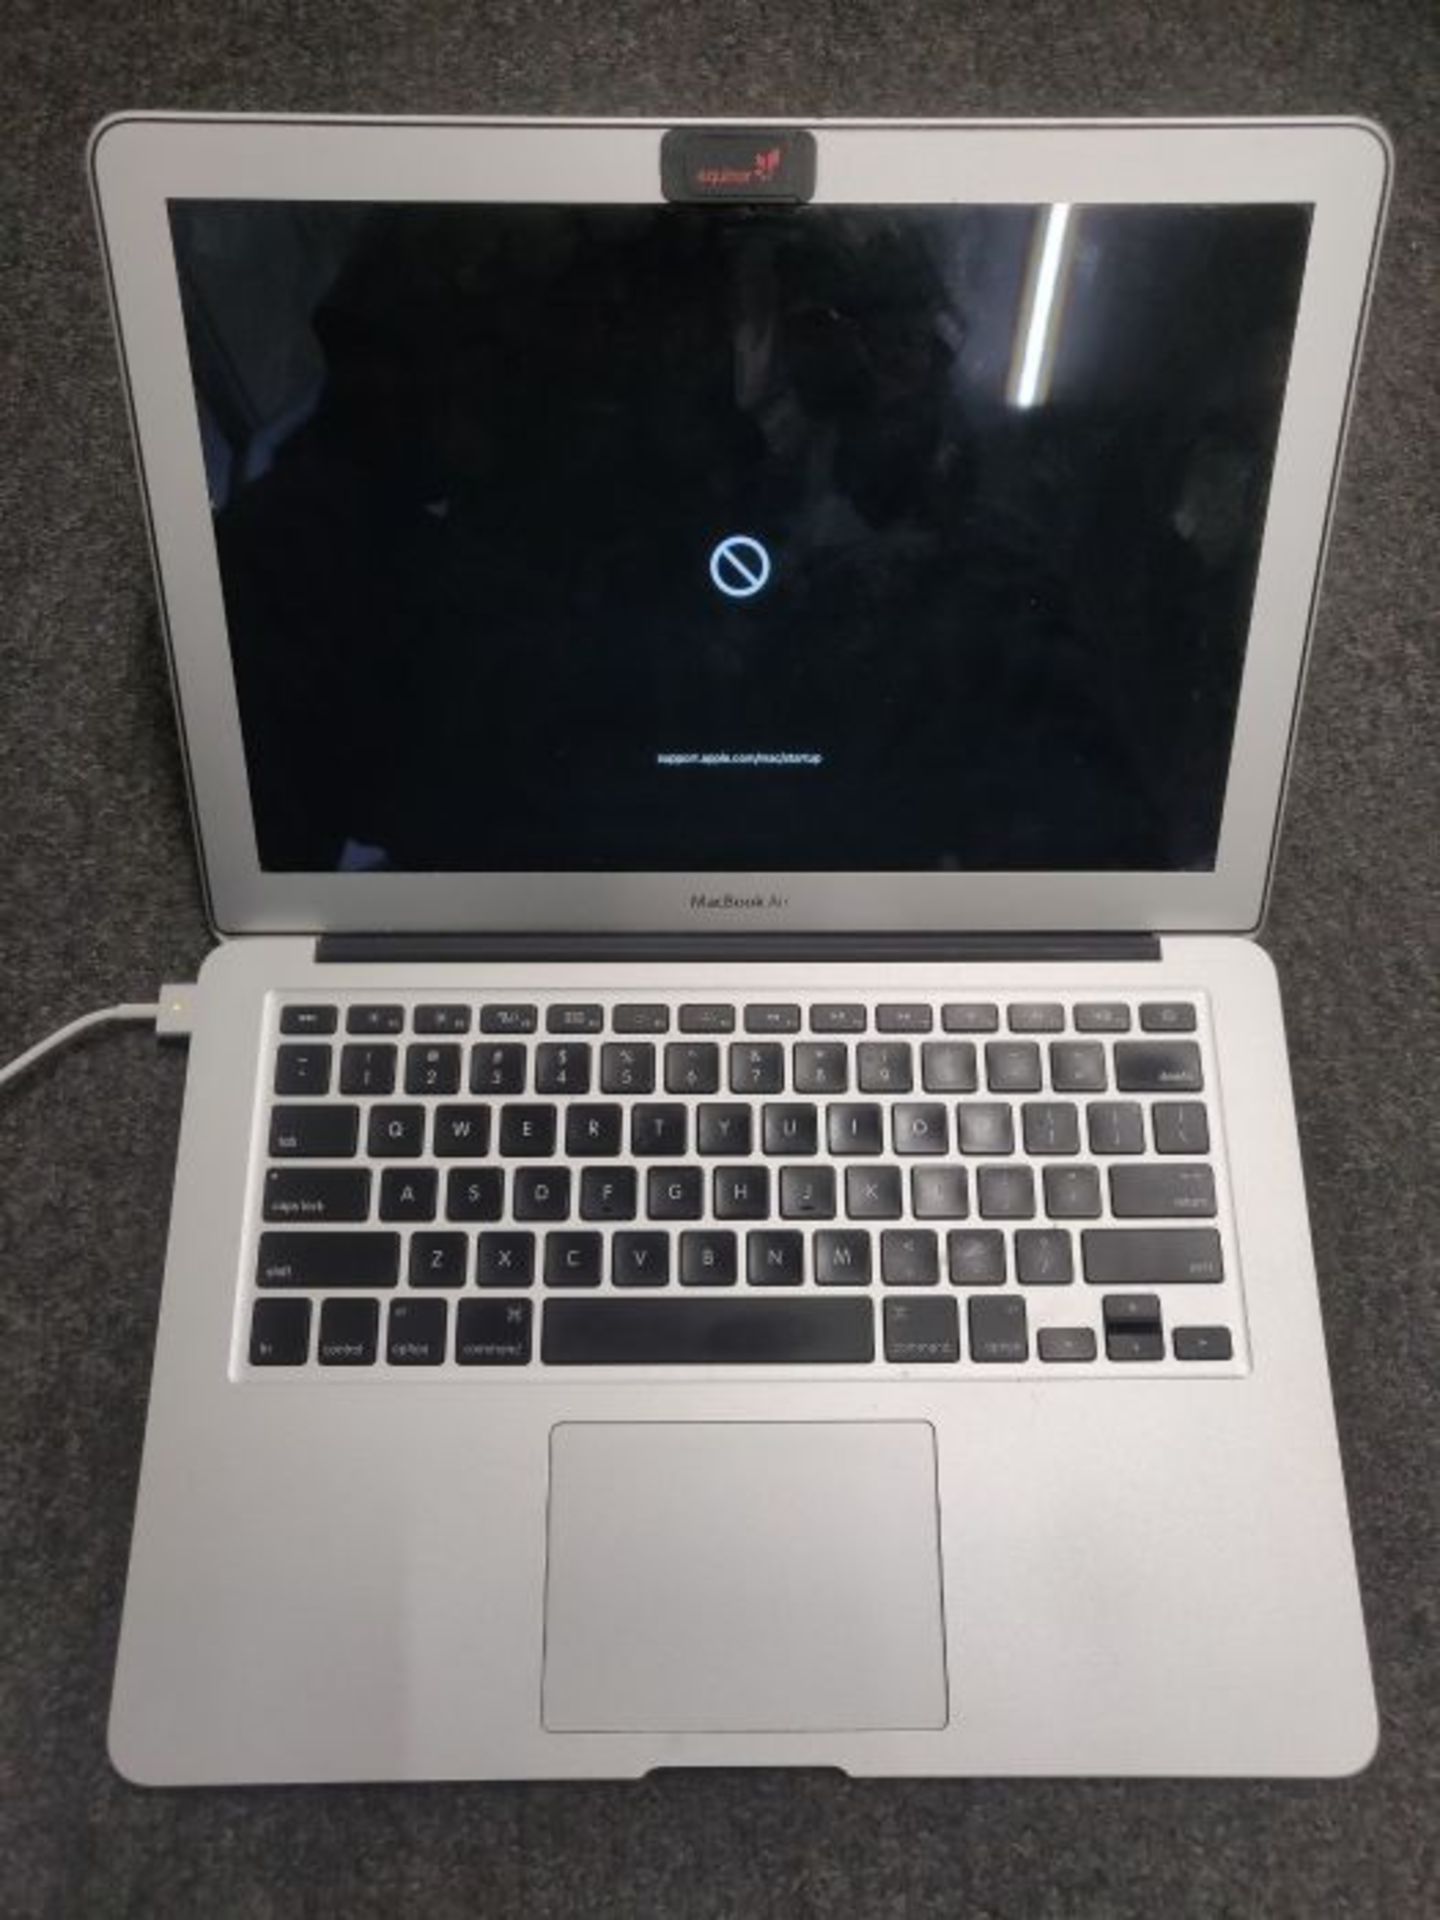 RRP £600.00 MacBook Air (13-inch, Early 2015) No Charger, in working order: Serial Number: C1MPFKM - Image 2 of 3